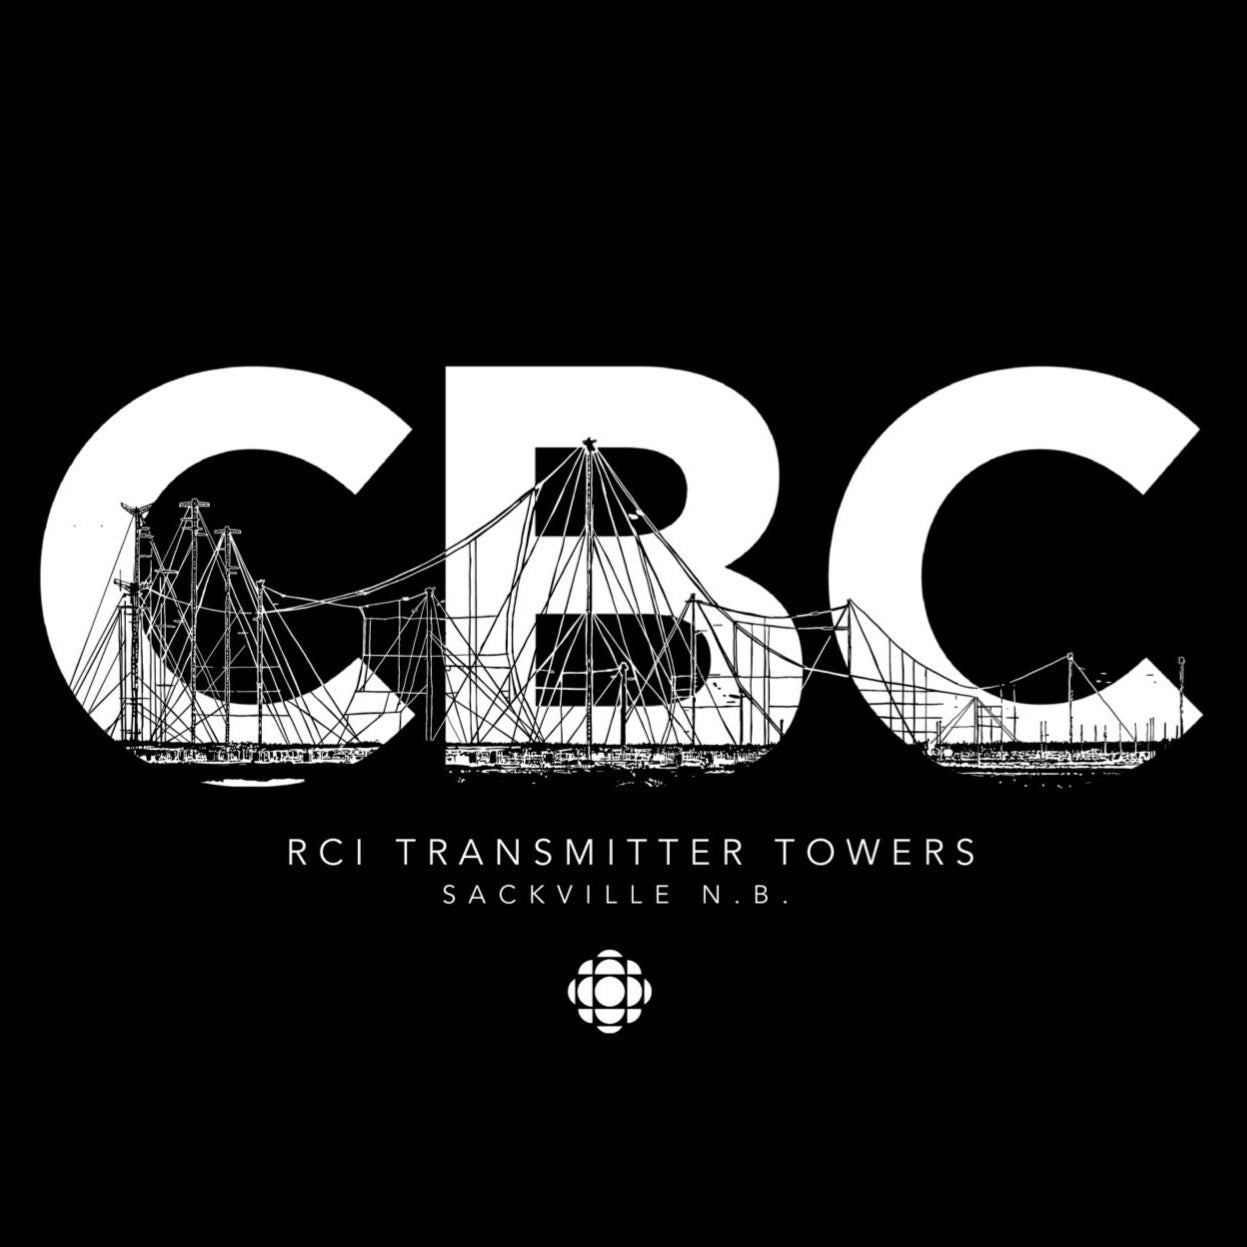 CBC Transmitter Towers